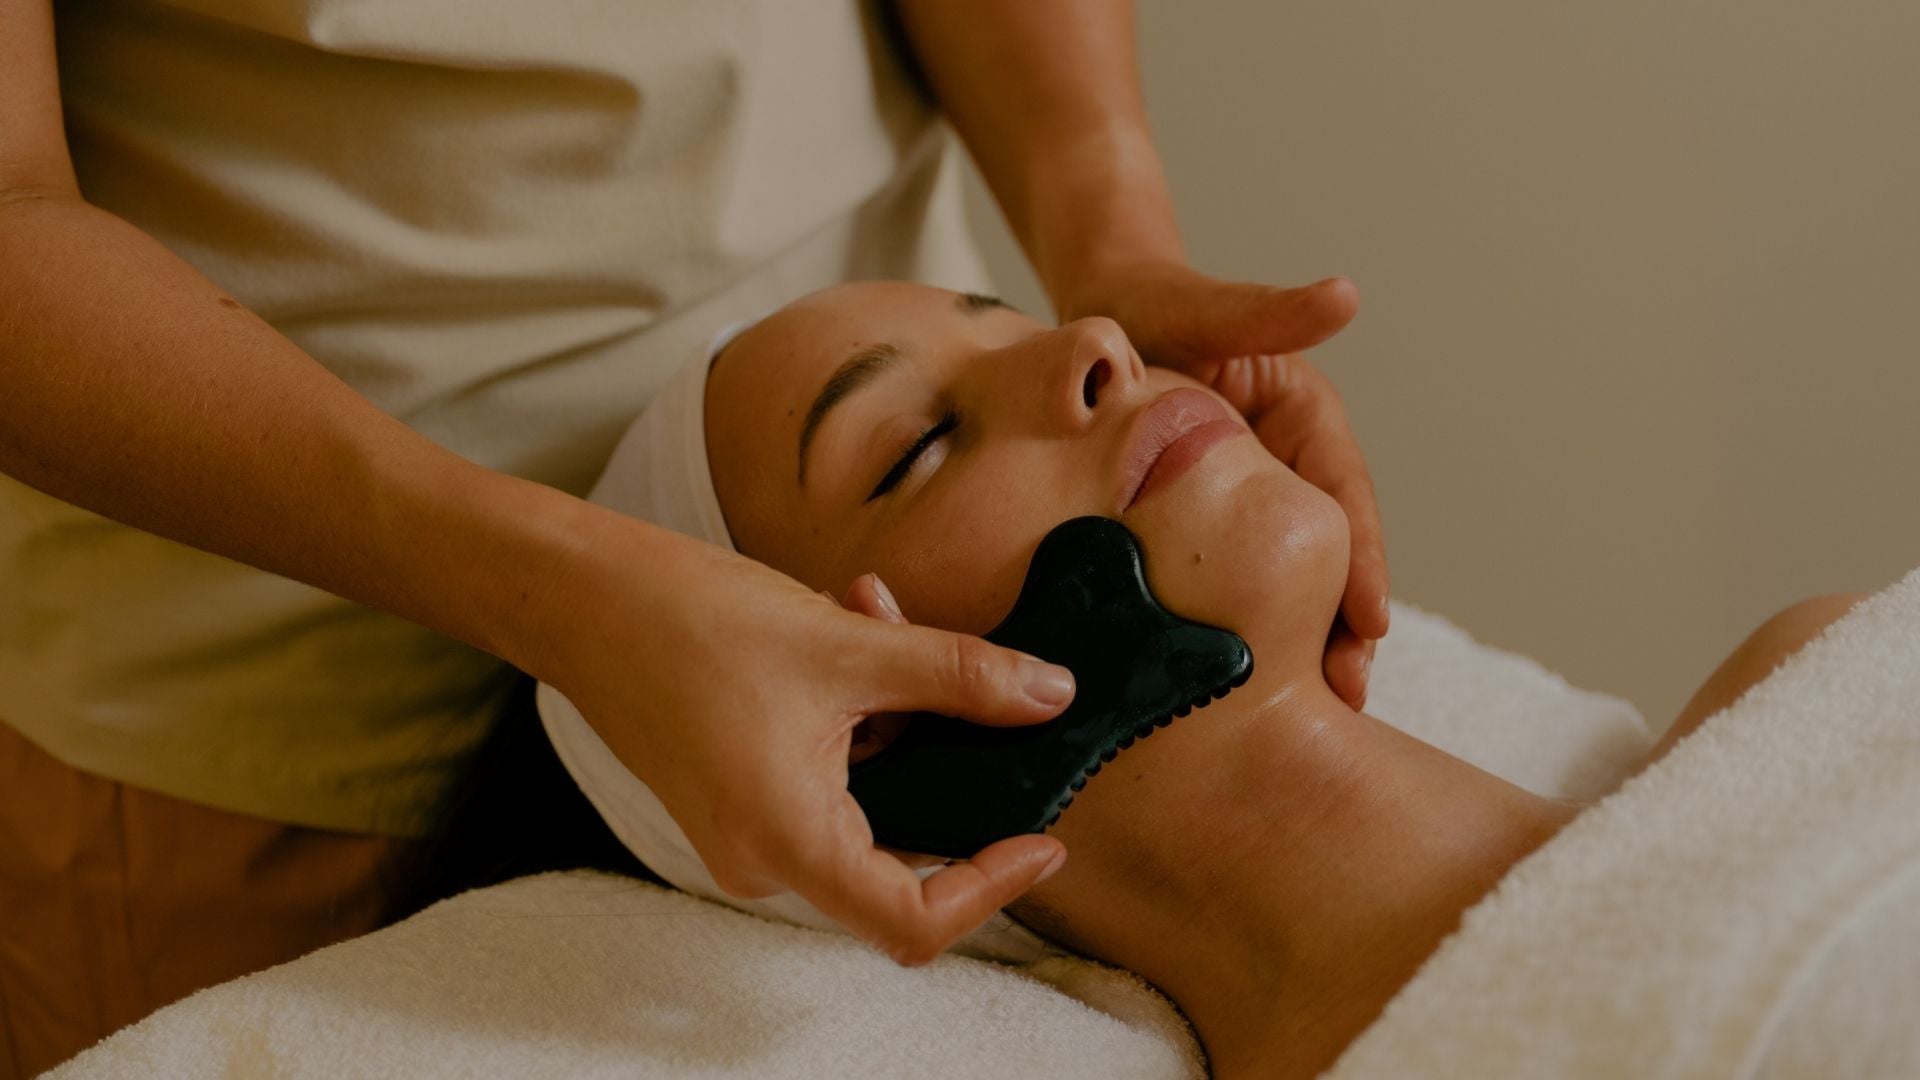 Woman getting a face massage with a Gua sha tool